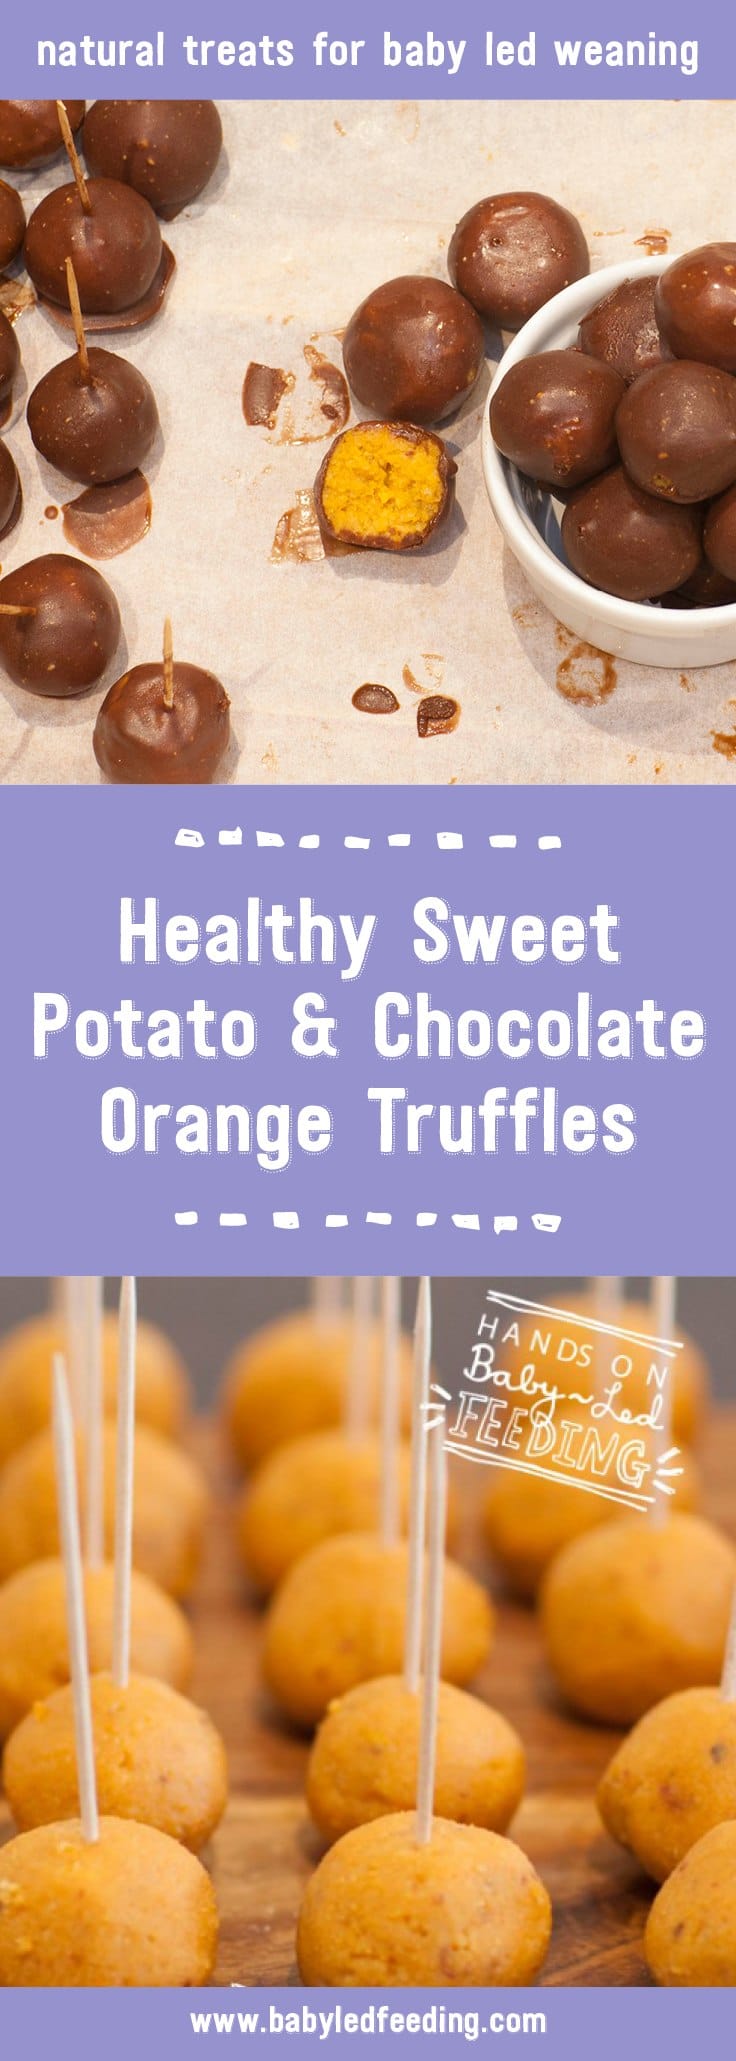 Sweet Potato & Orange Chocolate Truffles -Vegan & Refined Sugar Free. Roasted sweet potato, sweet dates, fragrant orange oil, orange juice, coco, with optional cashew butter. These make a delicious healthy snack for toddlers, moms, and dads! Use as a sweet appetizer or a healthy dessert. These babies are freezer friendly making this an easy make ahead recipe. #truffles #vegan #makeahead #babyledweaning #babyledfeeding #sweetpotato